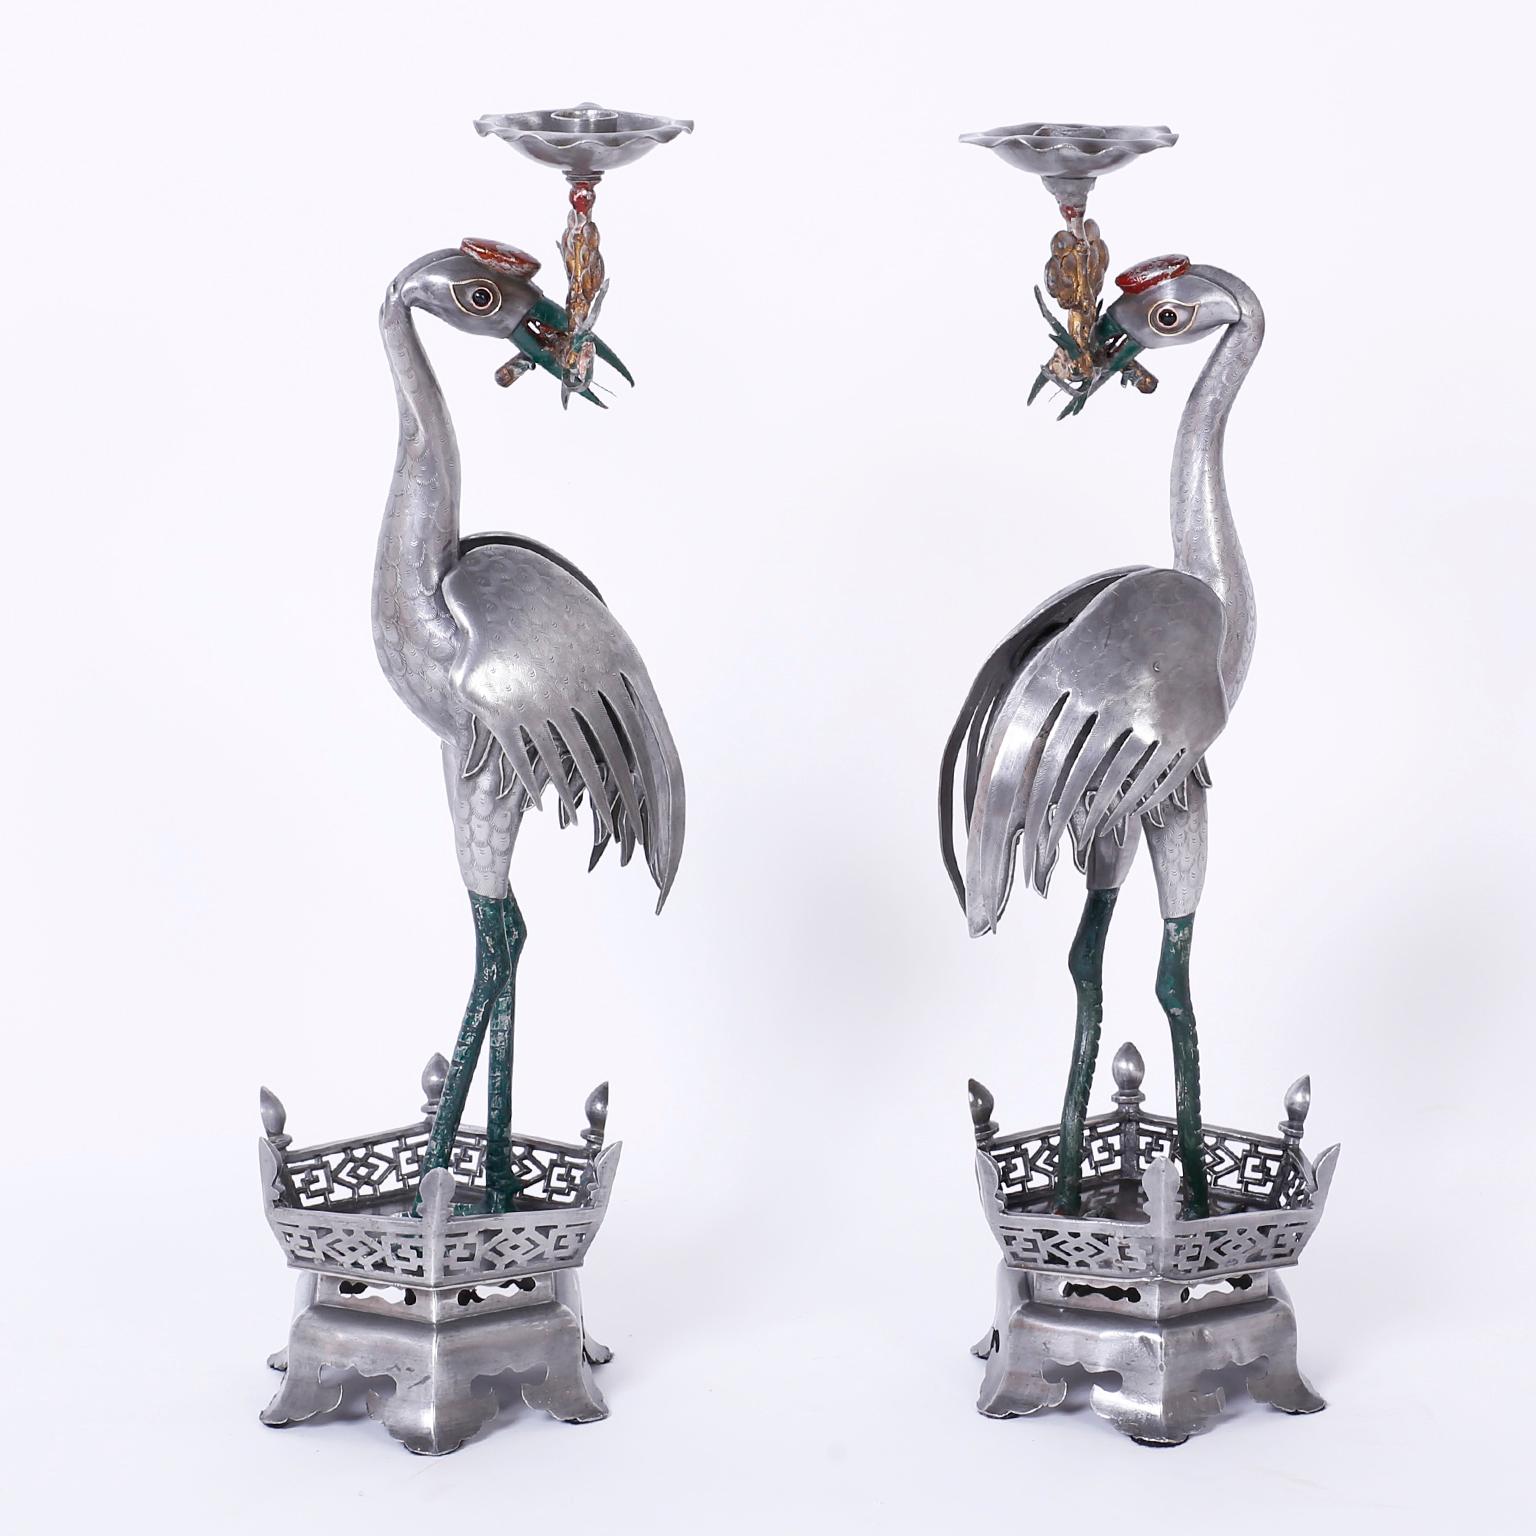 Pair of antique Chinese pewter bird candlesticks portraying storks or cranes holding floral candle cups in their beaks, retaining their original time-worn decorative paint and featuring engraved details and classic Ming style bases.
 